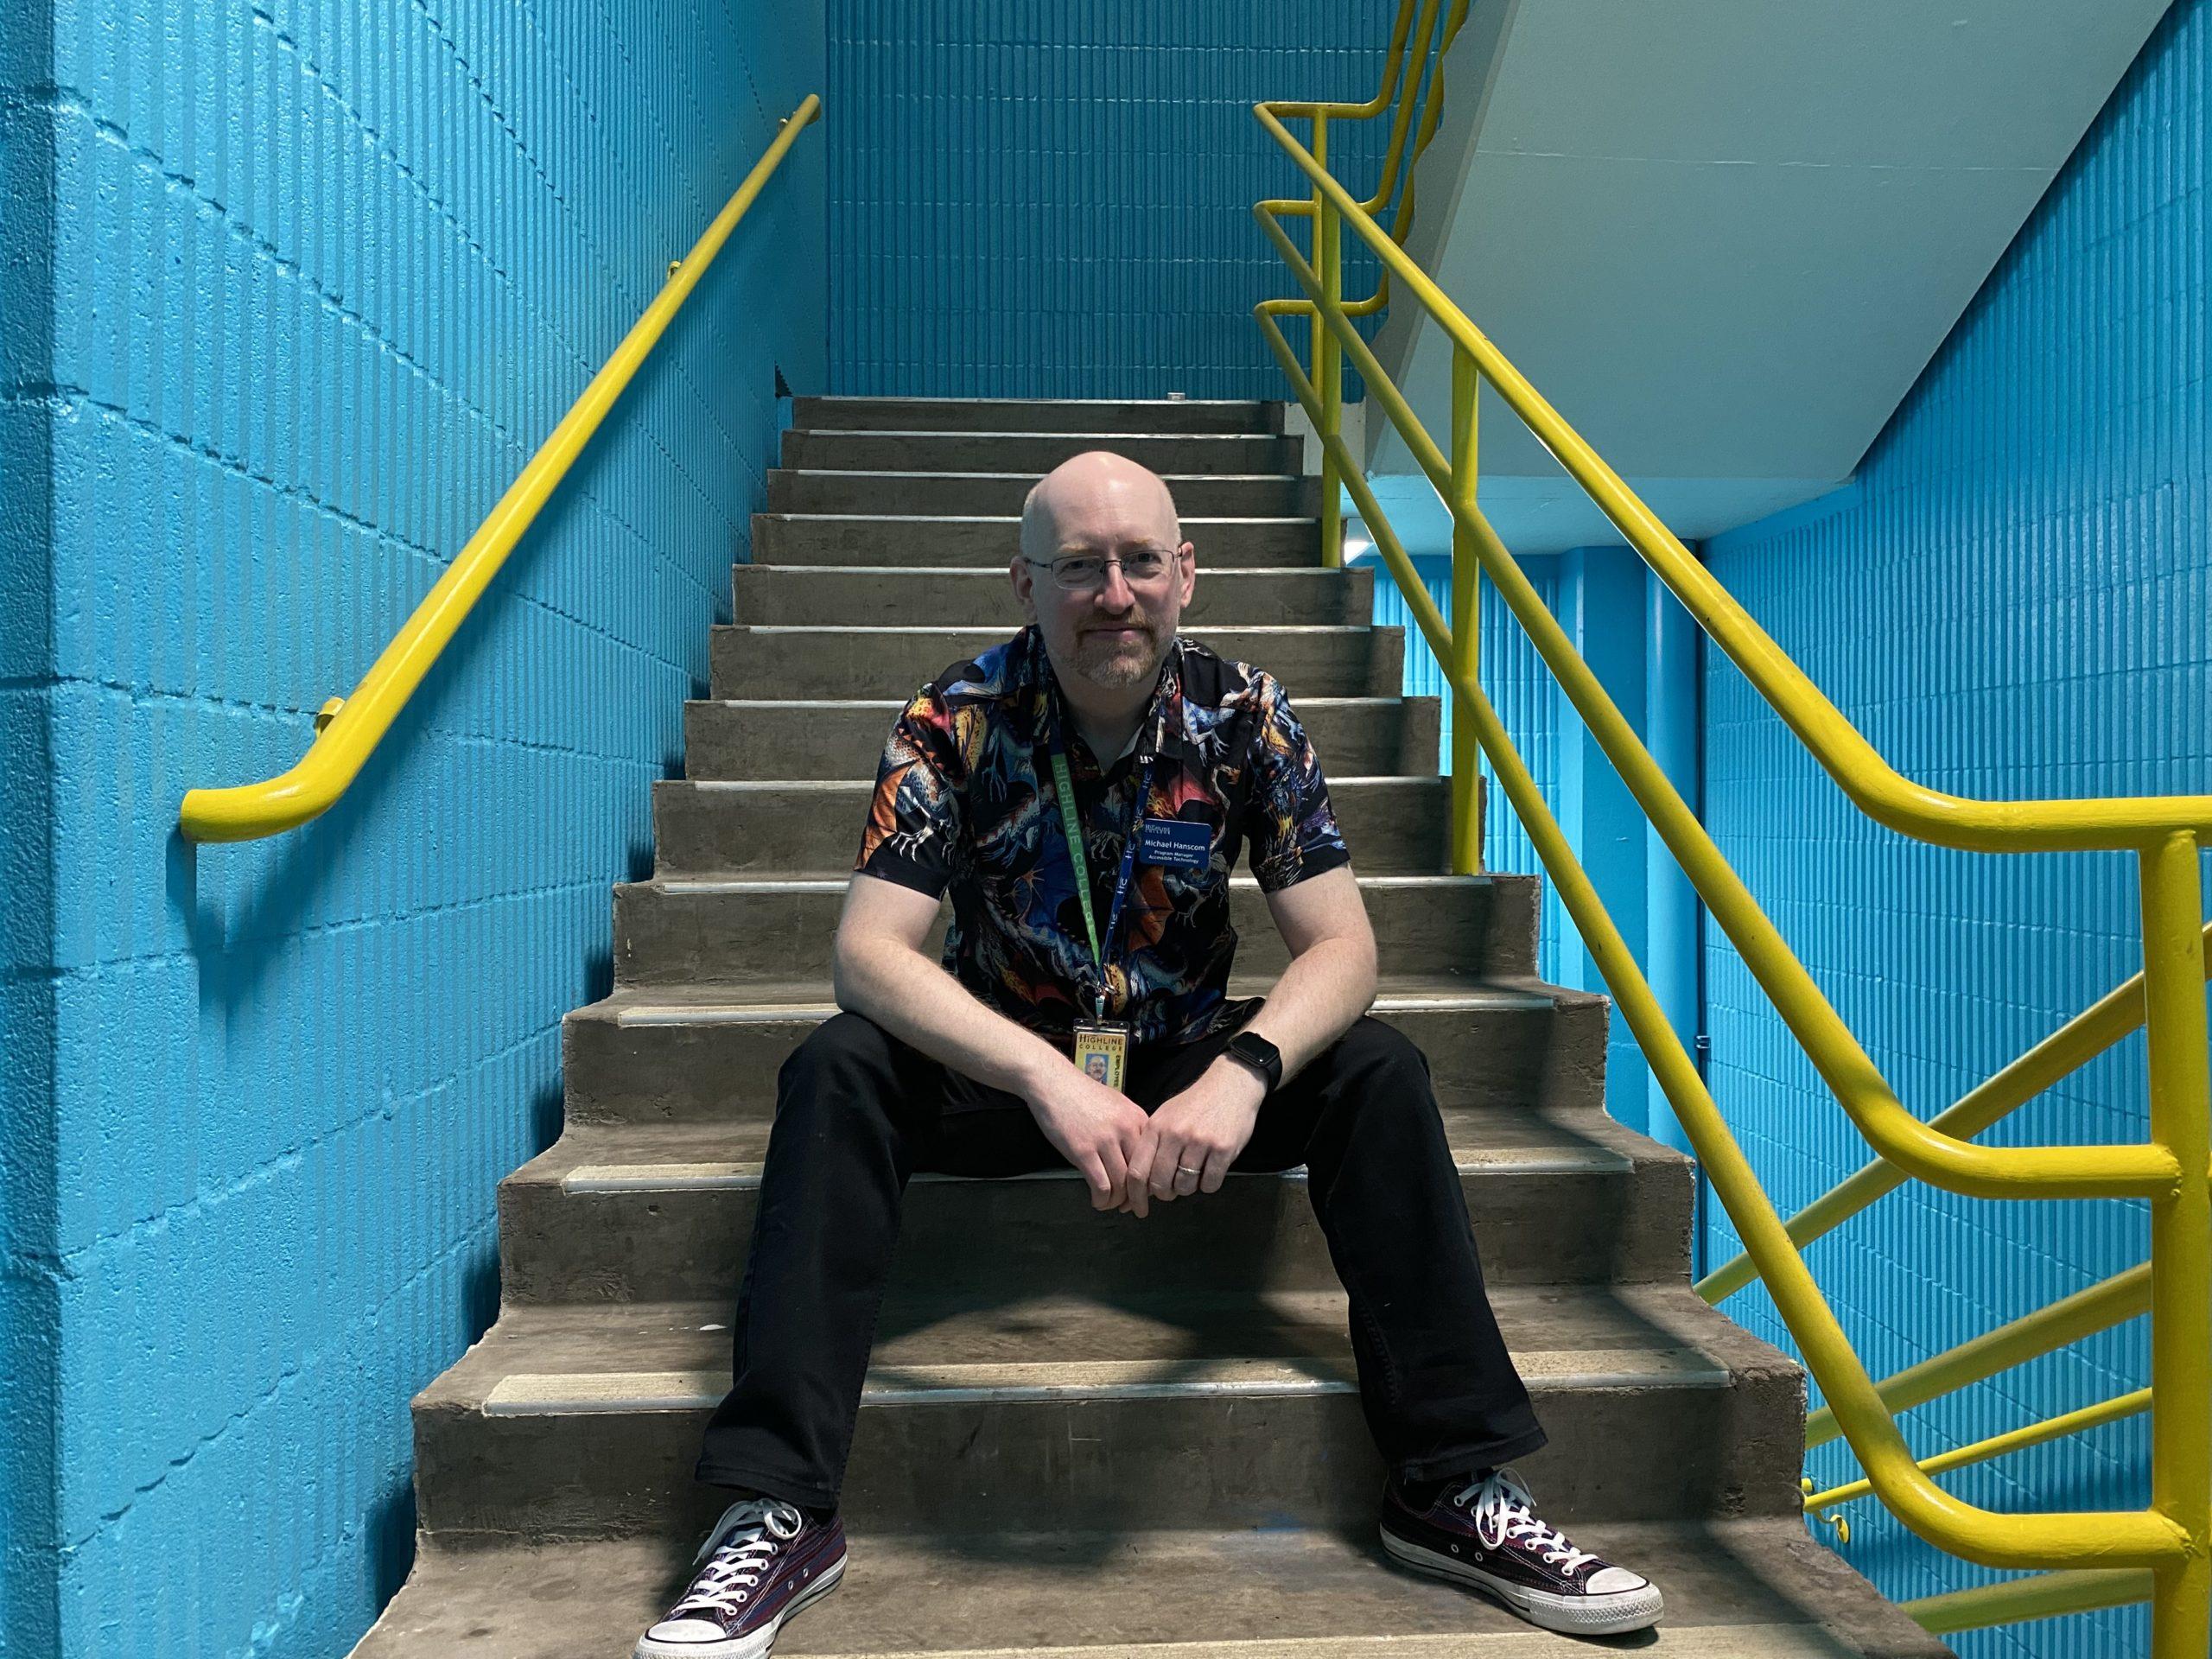 Me sitting in an industrial-looking stairwell with blue walls and metal railings. I have a somewhat bemused expression on my face.